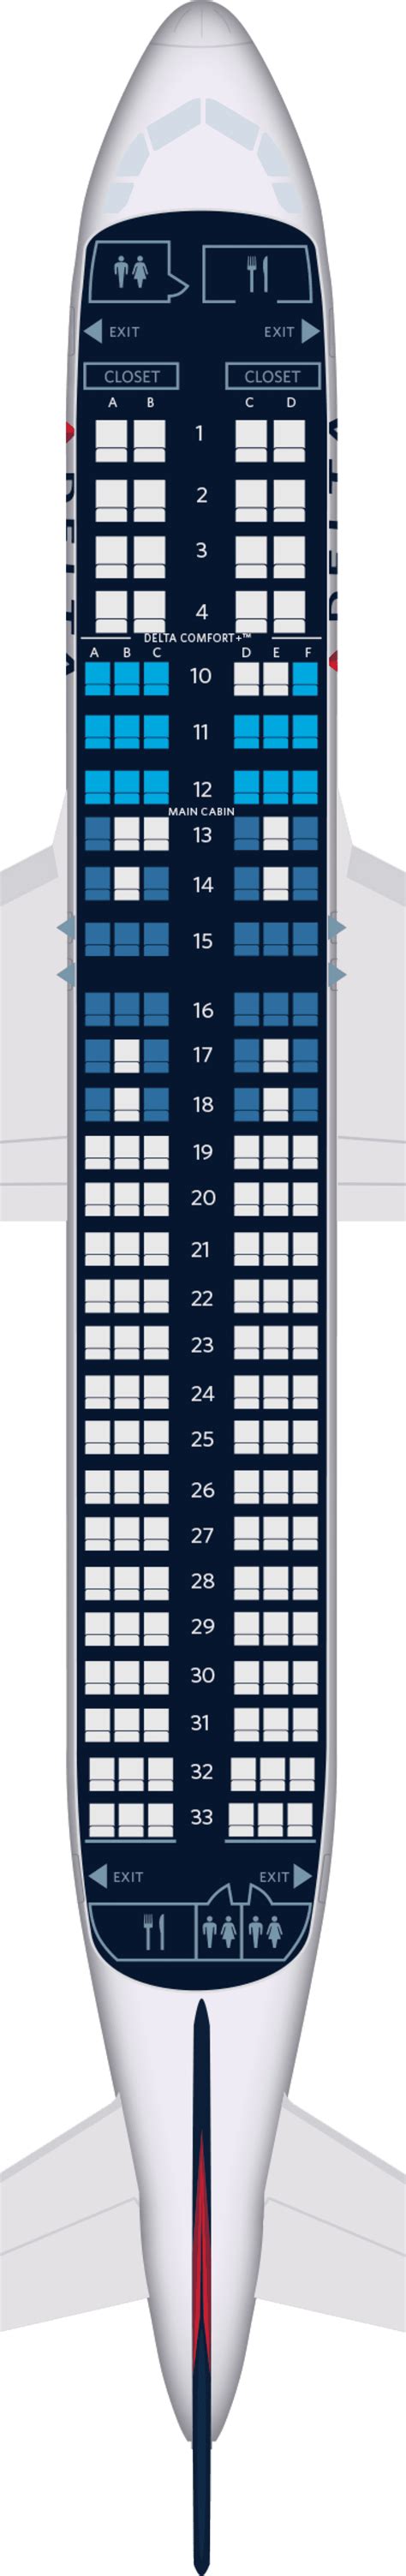 Airbus A320 Seat Chart